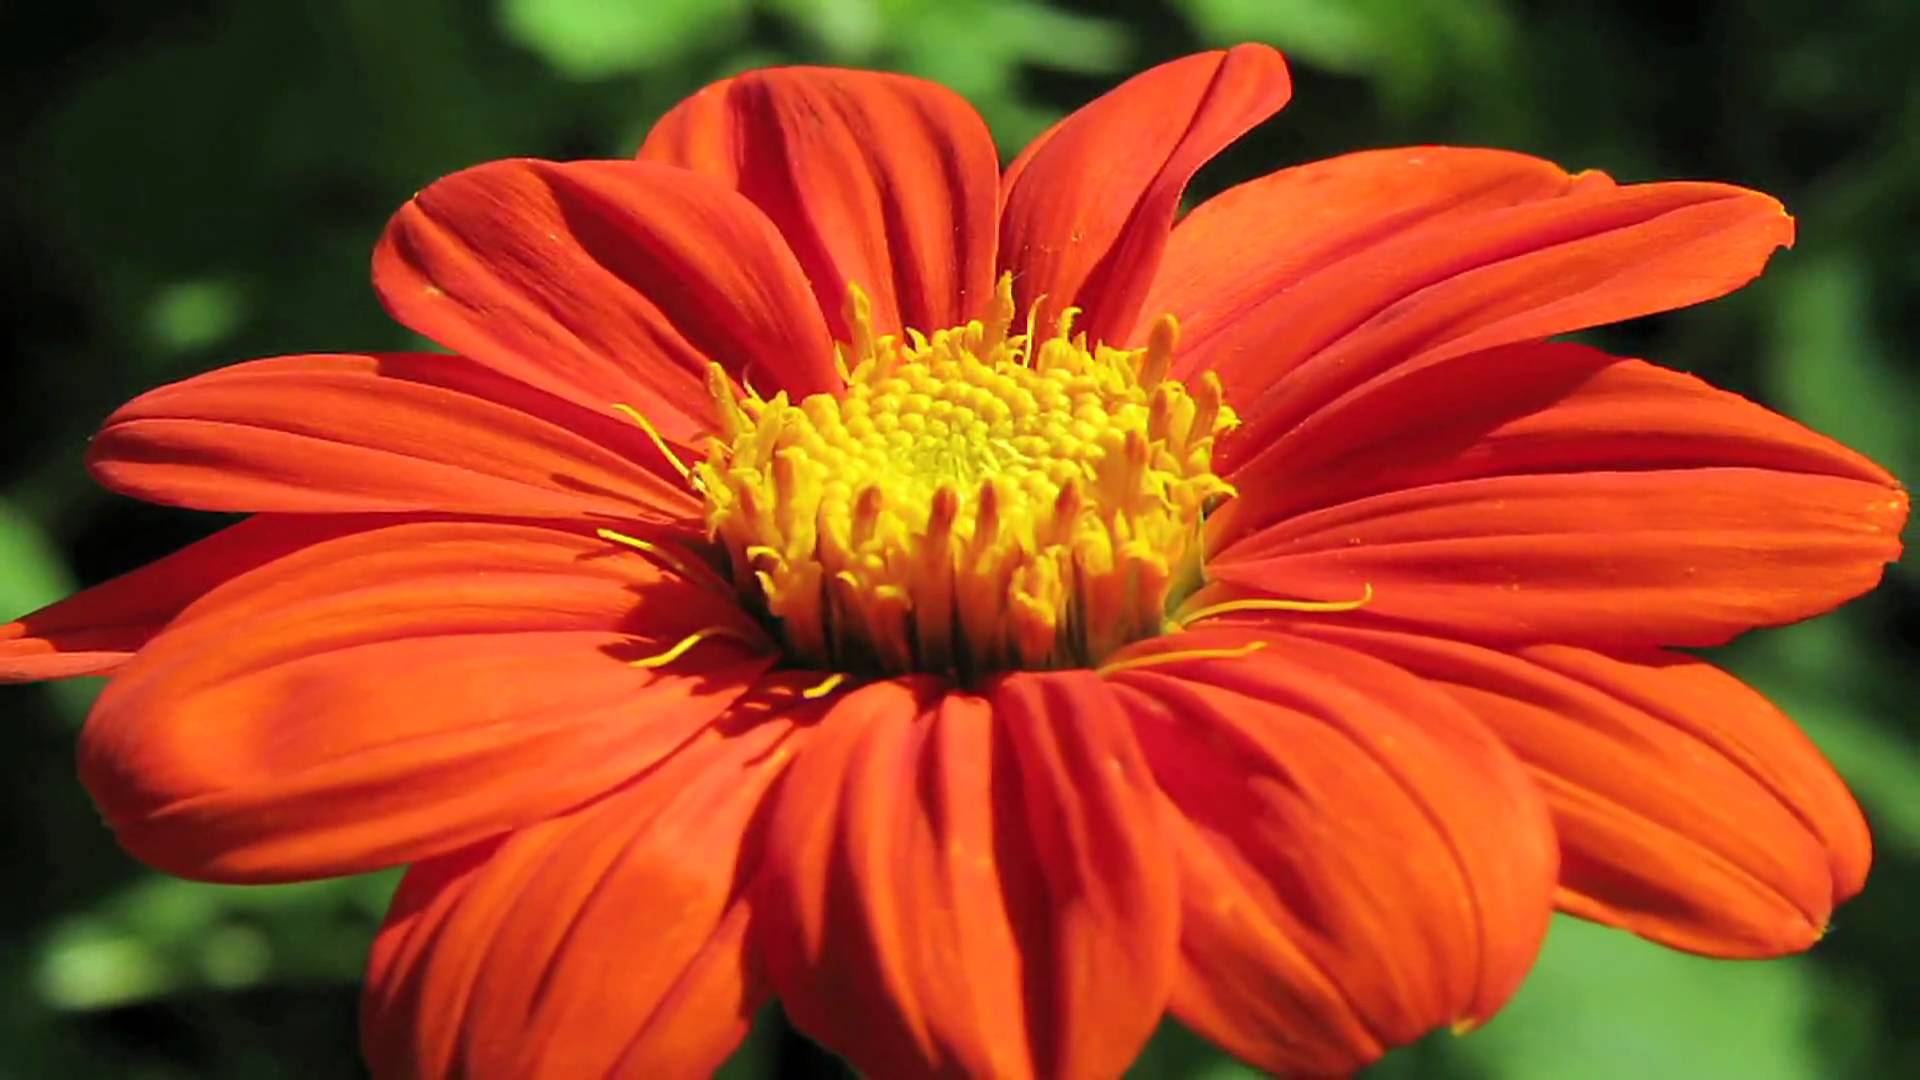 Mexican sunflower photo